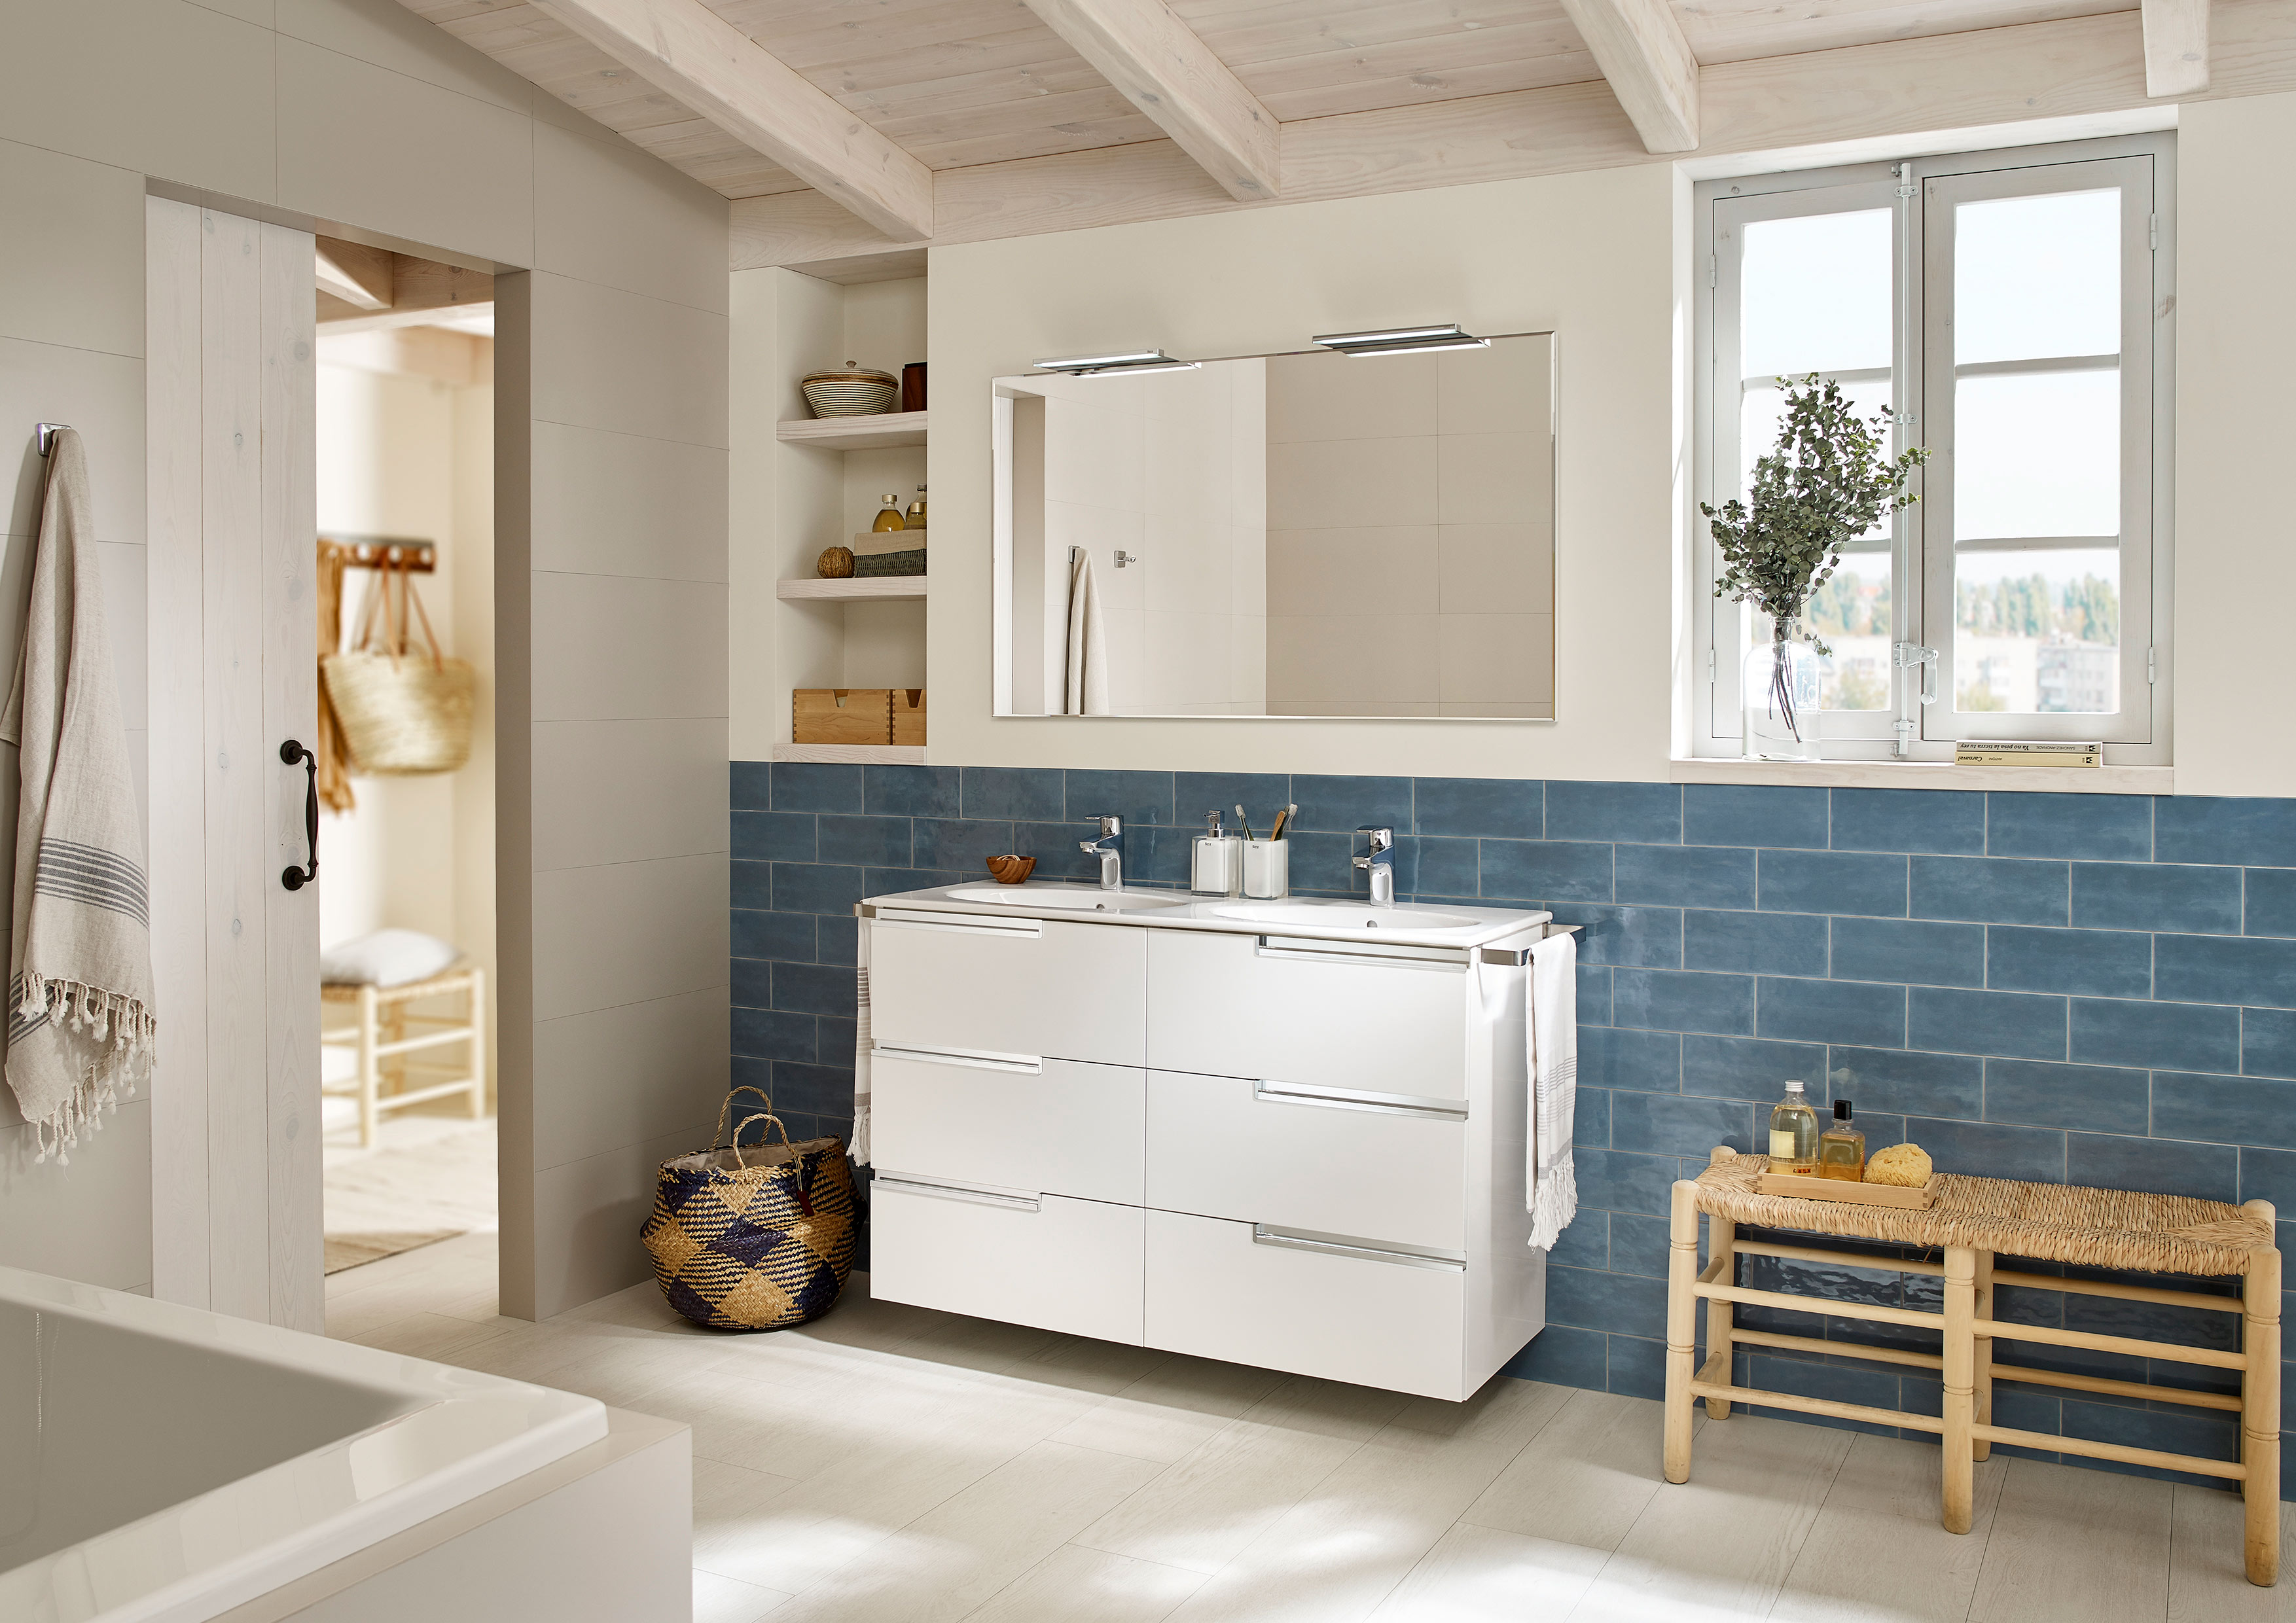 Create Space For Two With A Double Sink Bathroom Vanity Roca Life